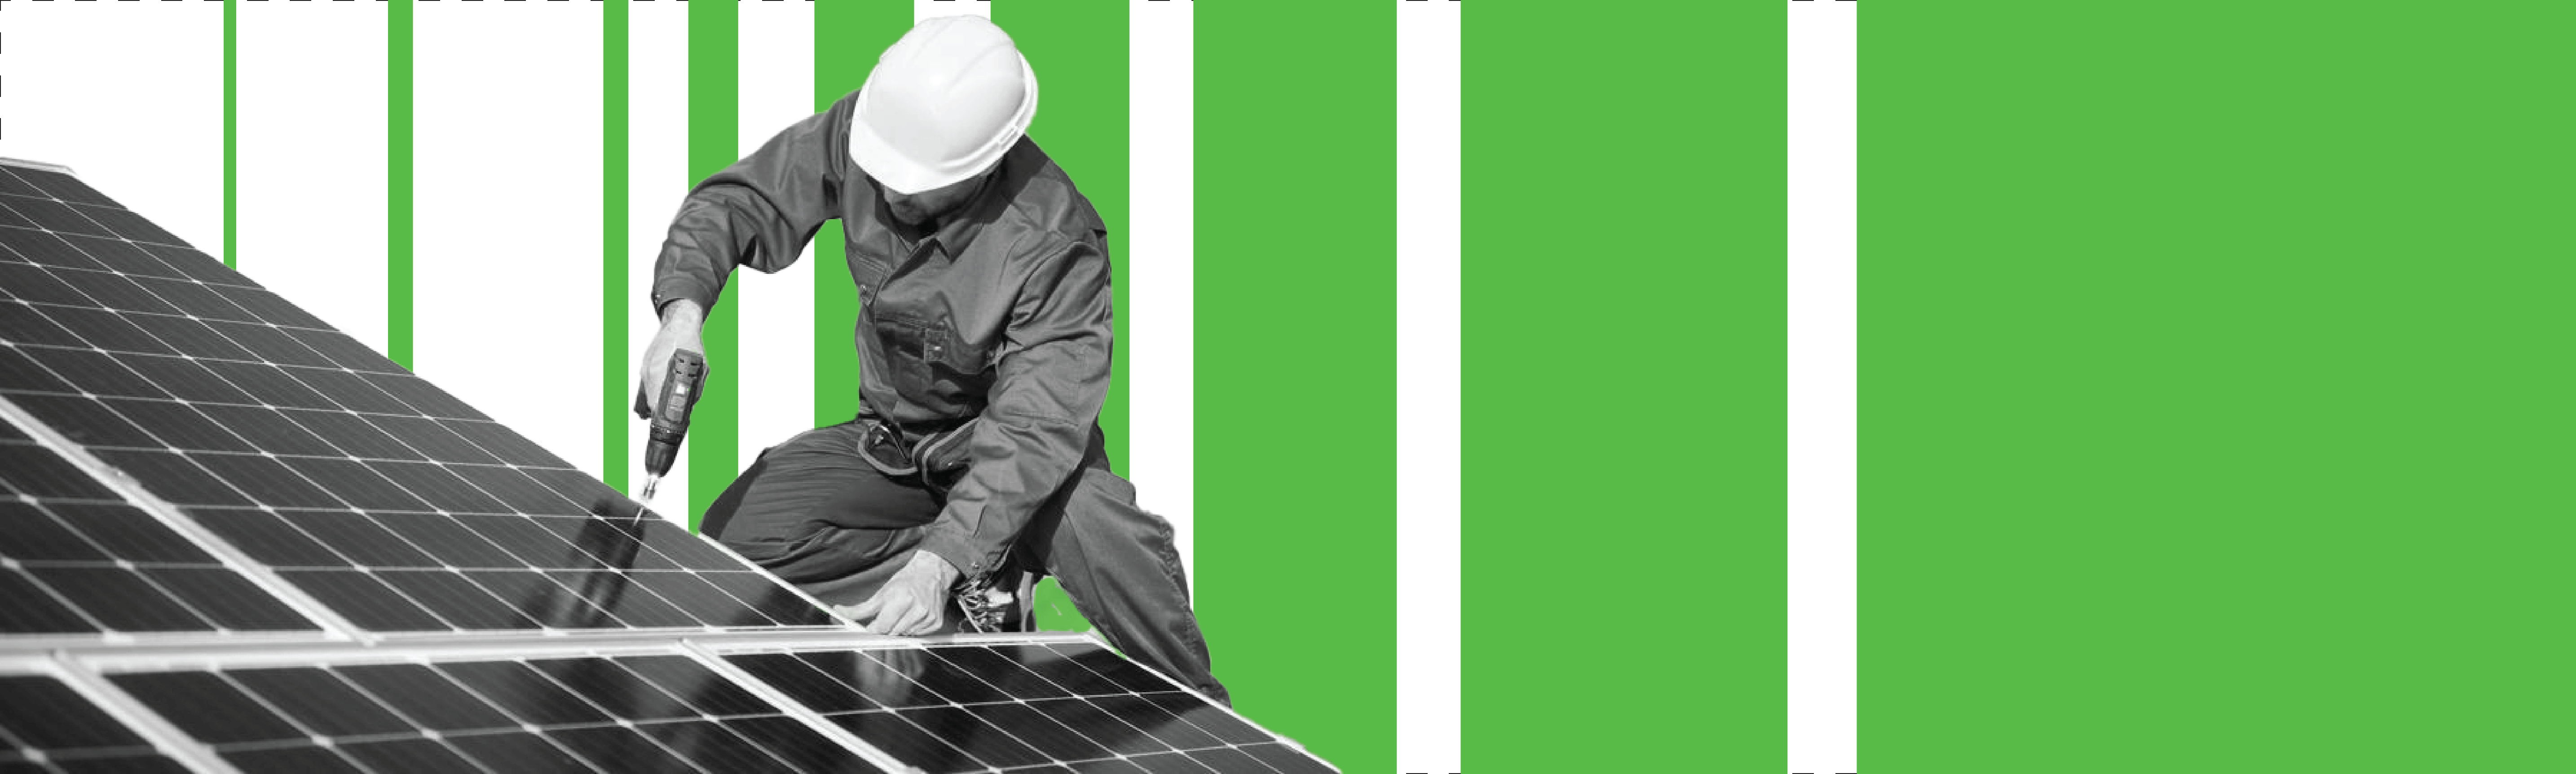 Construction worker installing a solar panel